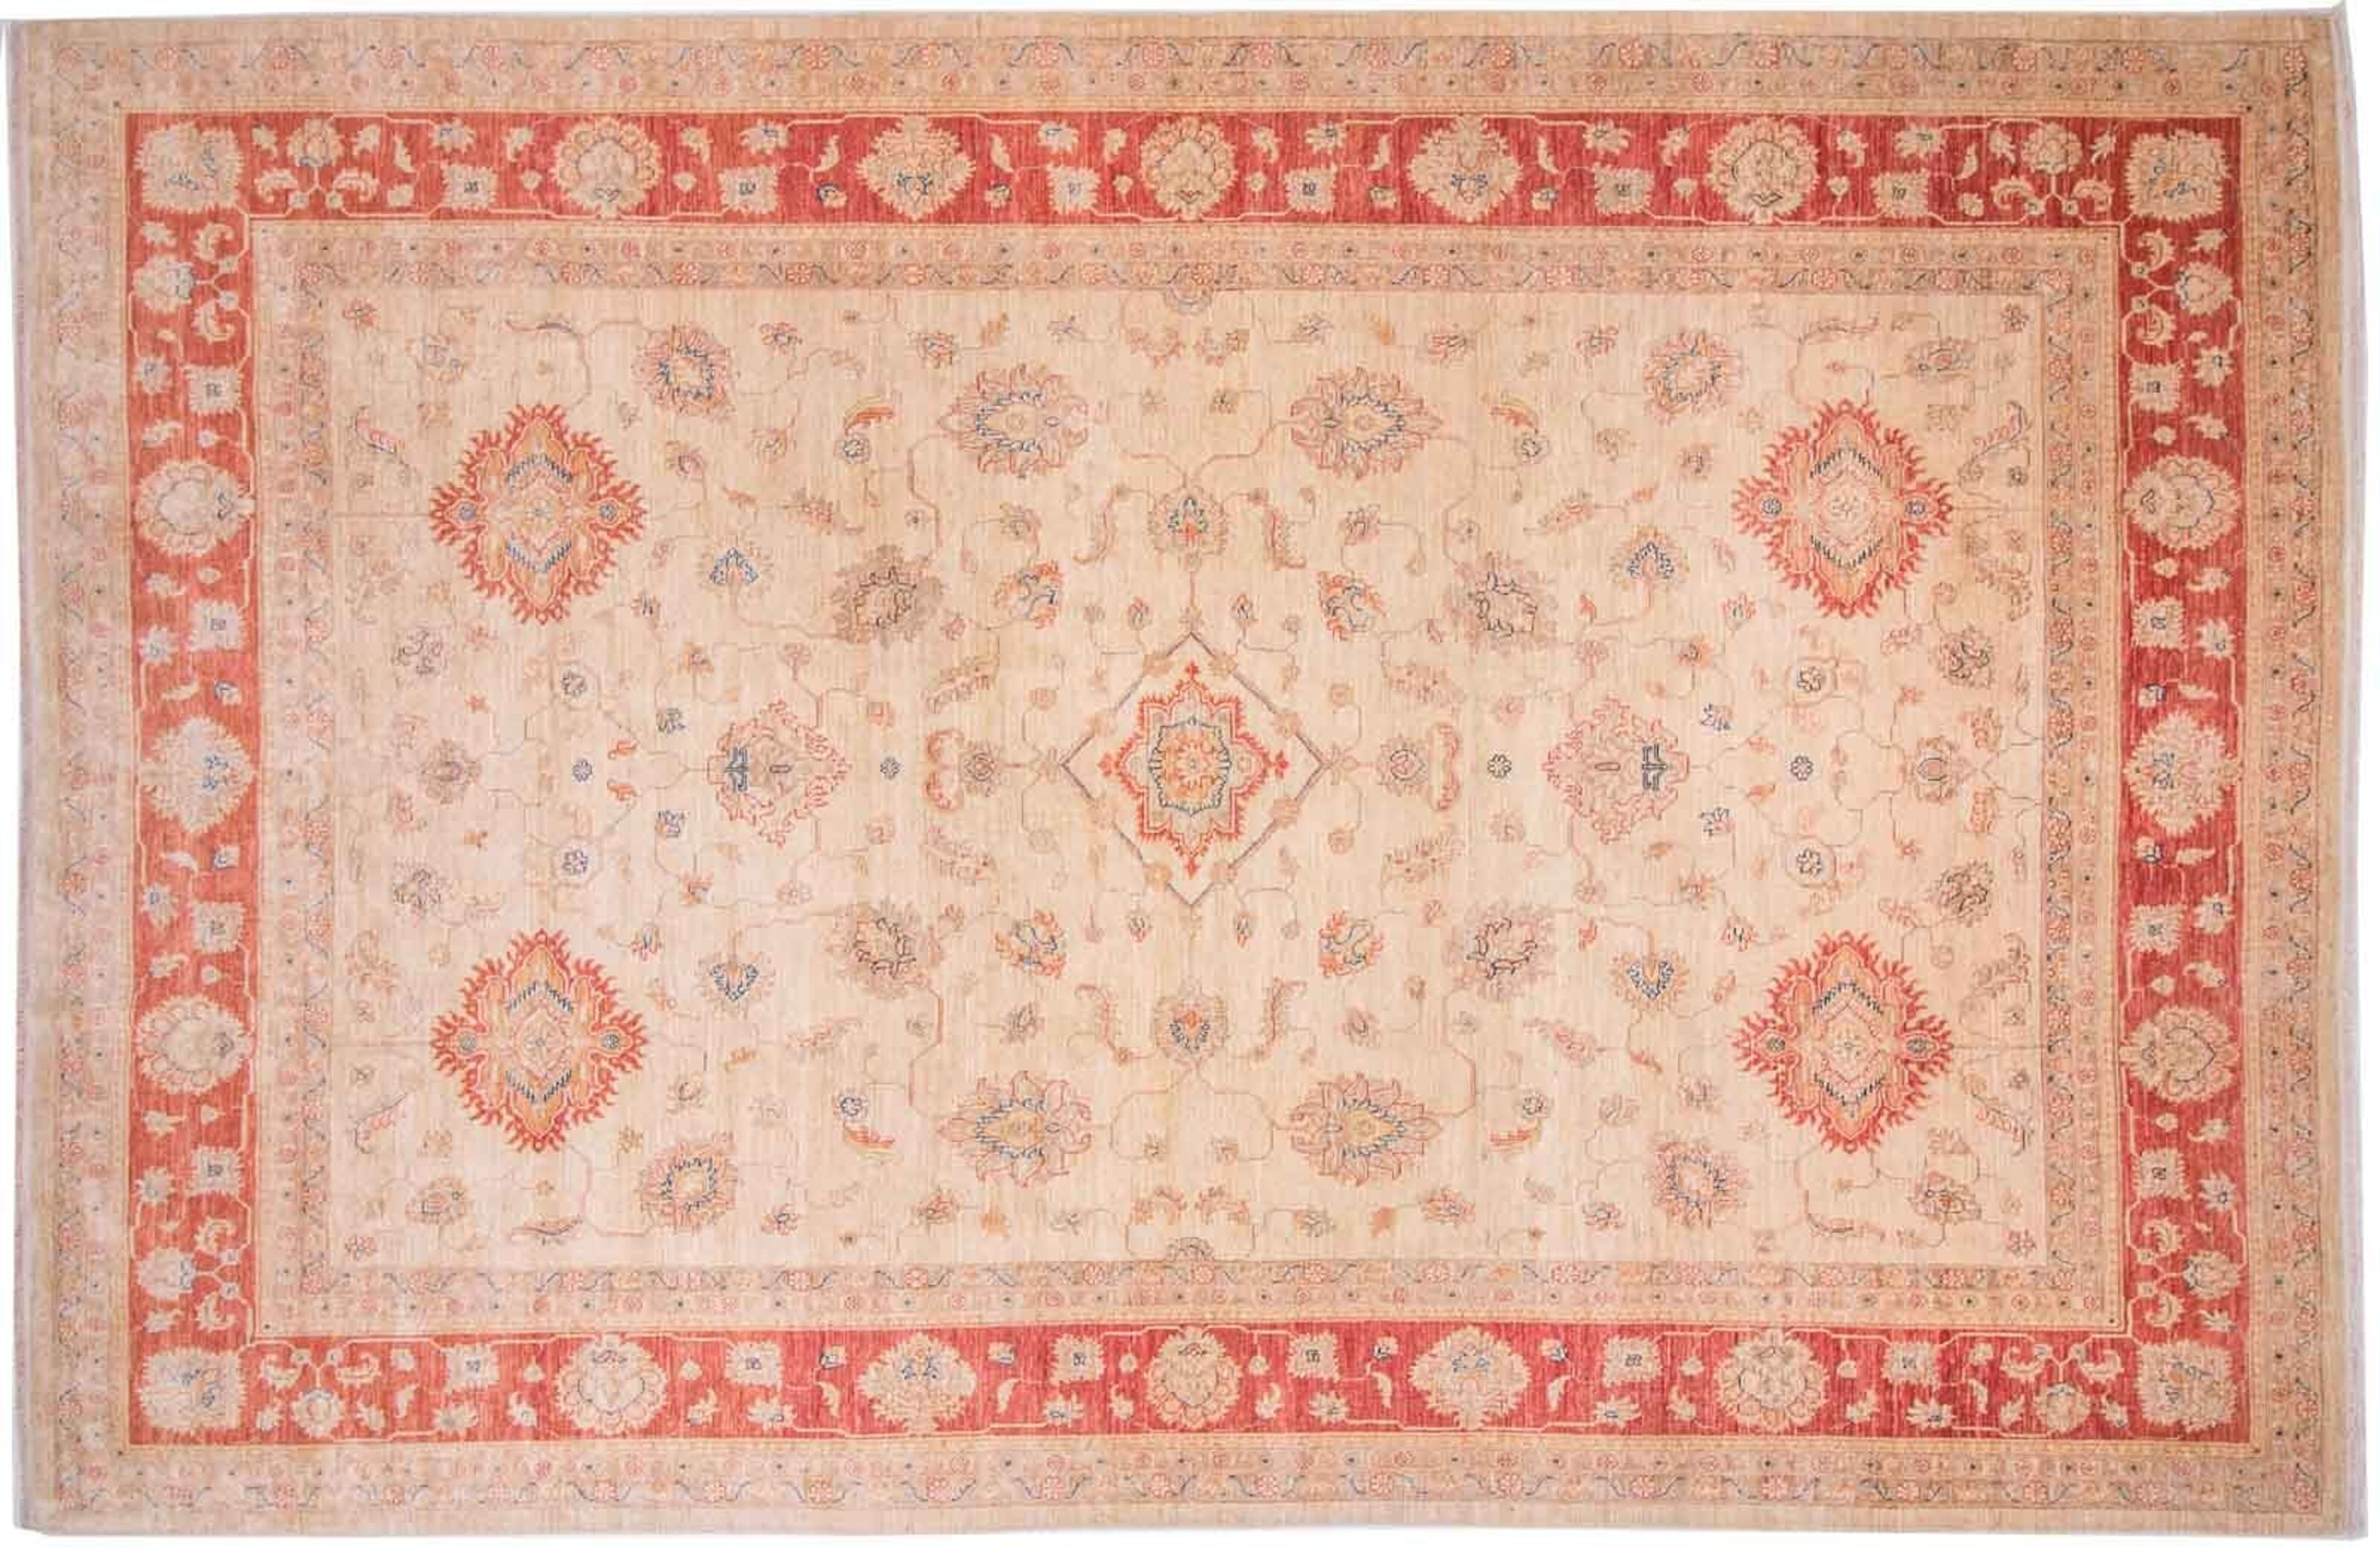 374x248 red carpet Buy pattern wholesale Afghan flower Ziegler Feiner Chobi hand-knotted 250x370